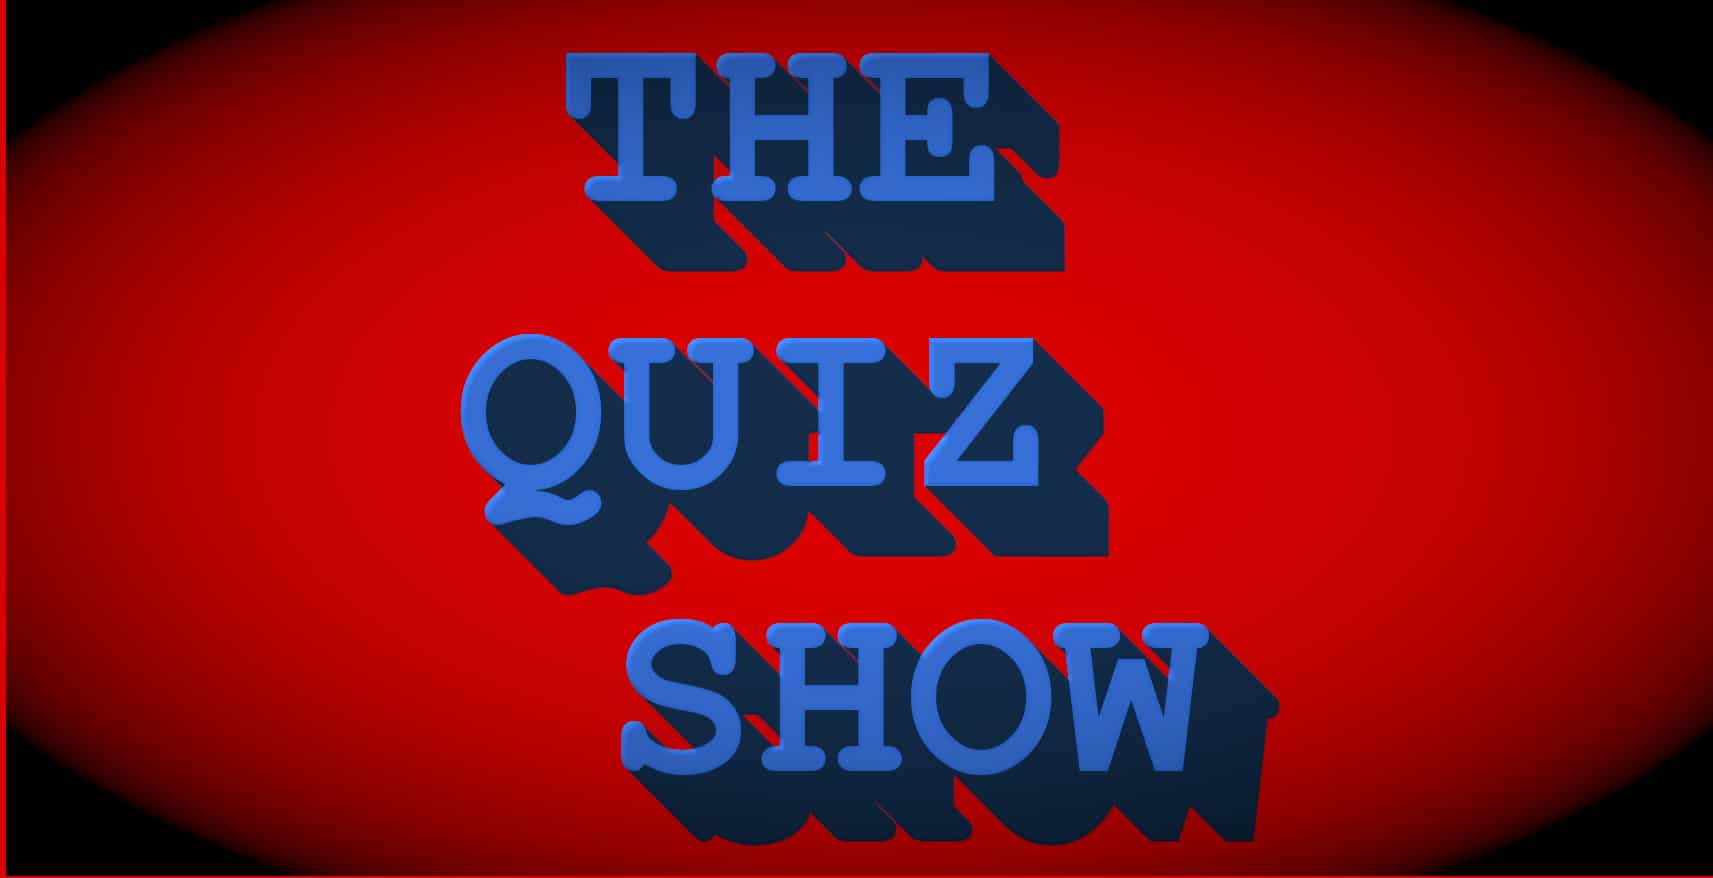 comedy about a television quiz show